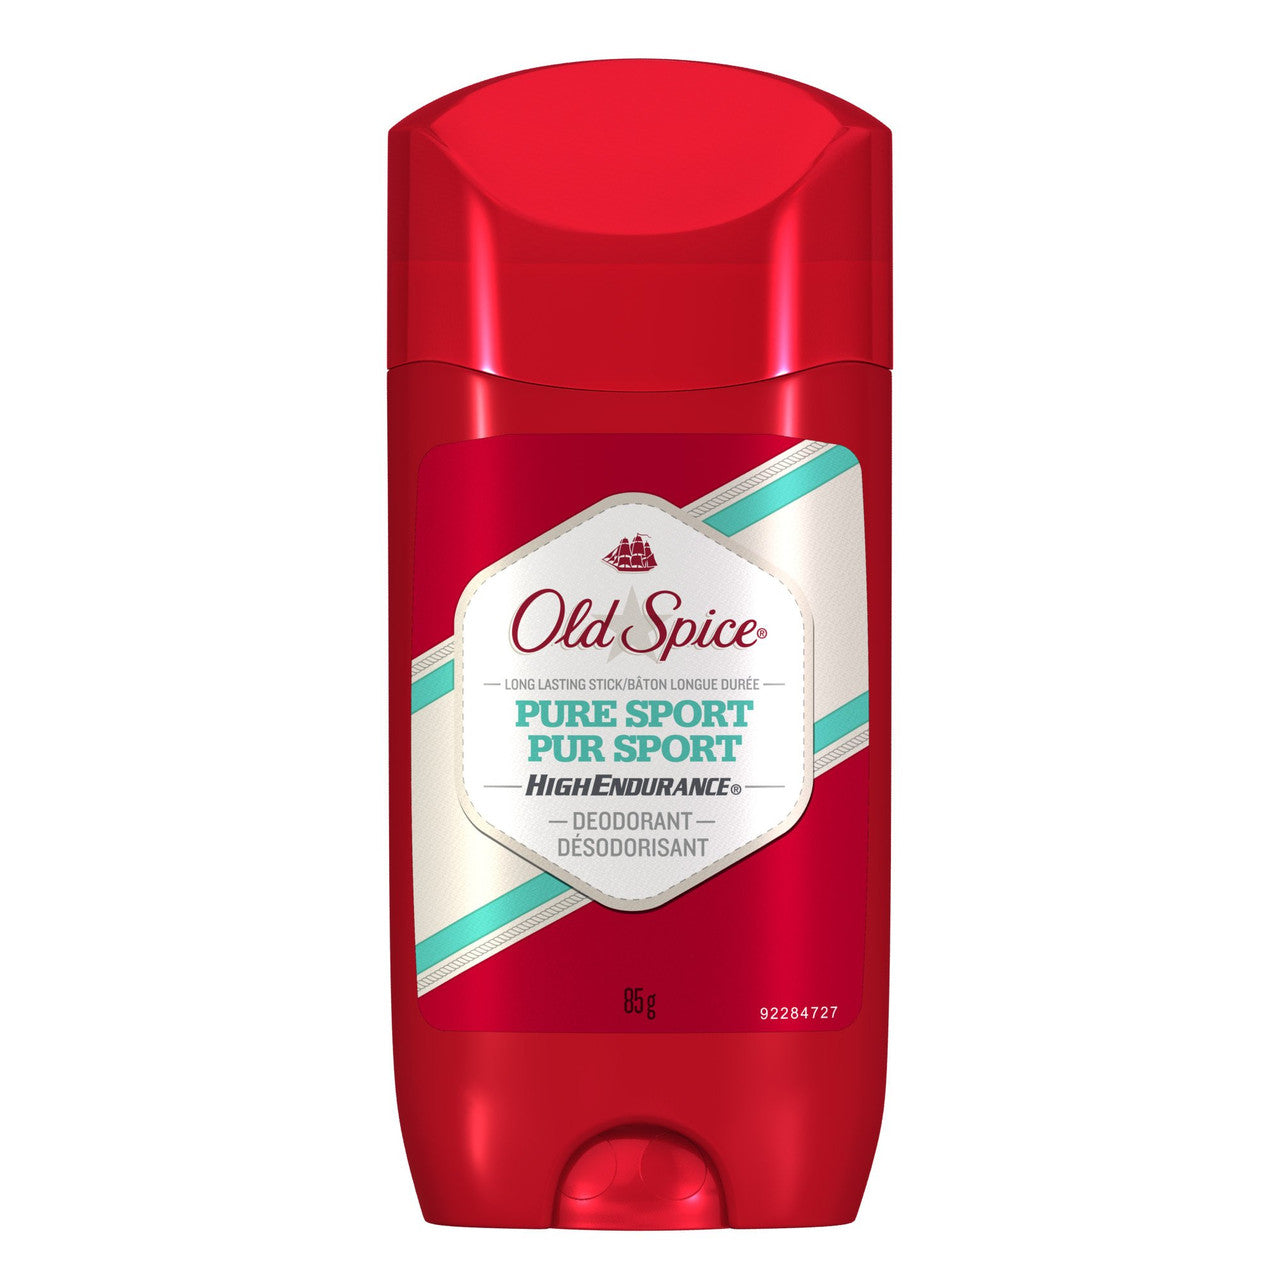 Old Spice High Endurance Deodorant, Pure Sport, 85g,{Imported from Canada}